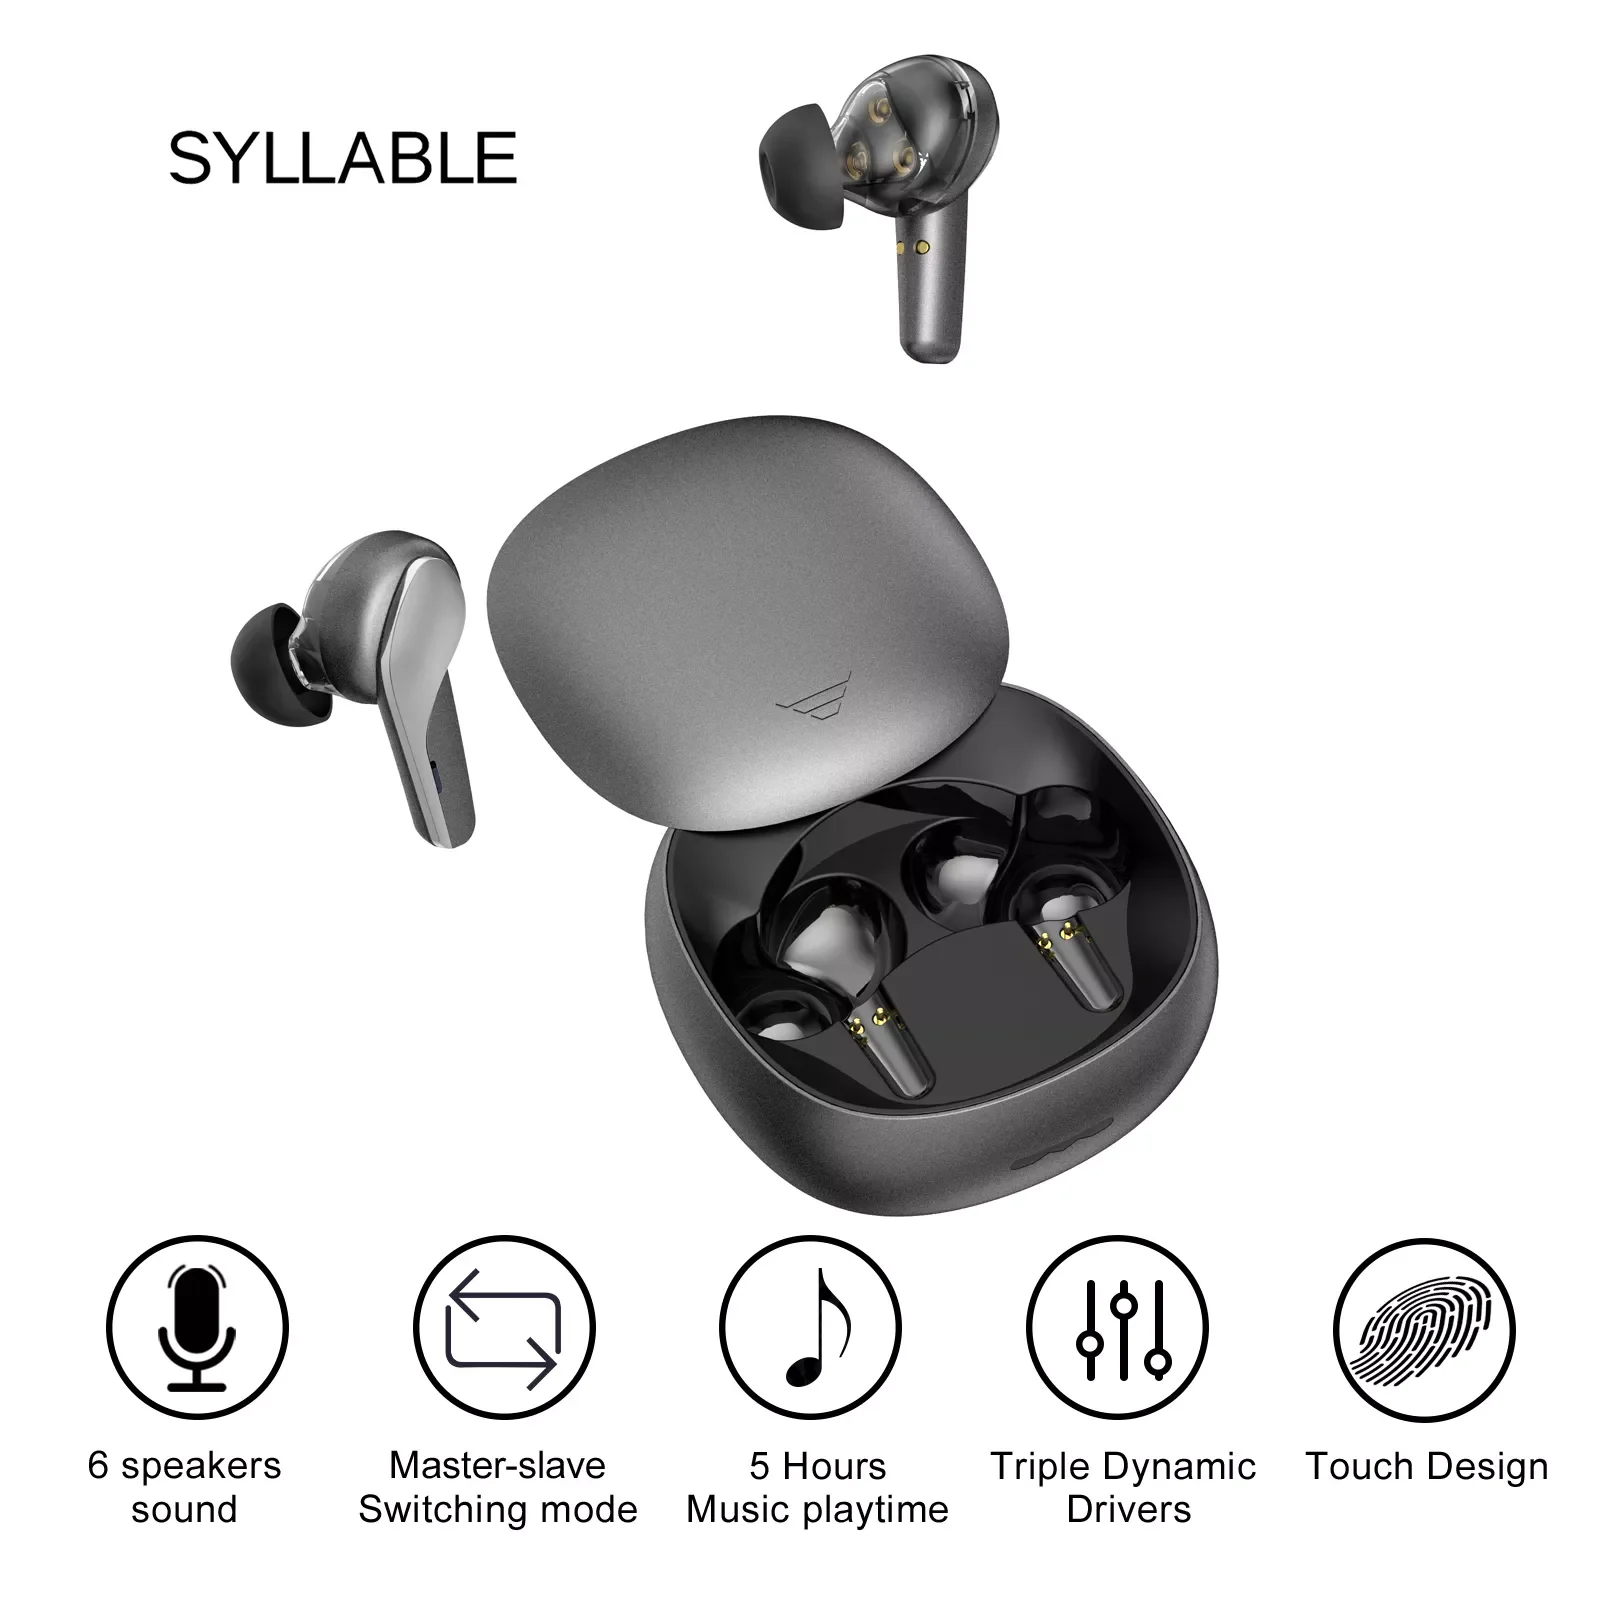 

Original SYLLABLE WD1100 TWS Earphones 5 hours True Wireless Stereo Earbuds Master-Slave Switching Mode Touch Syllable Headset